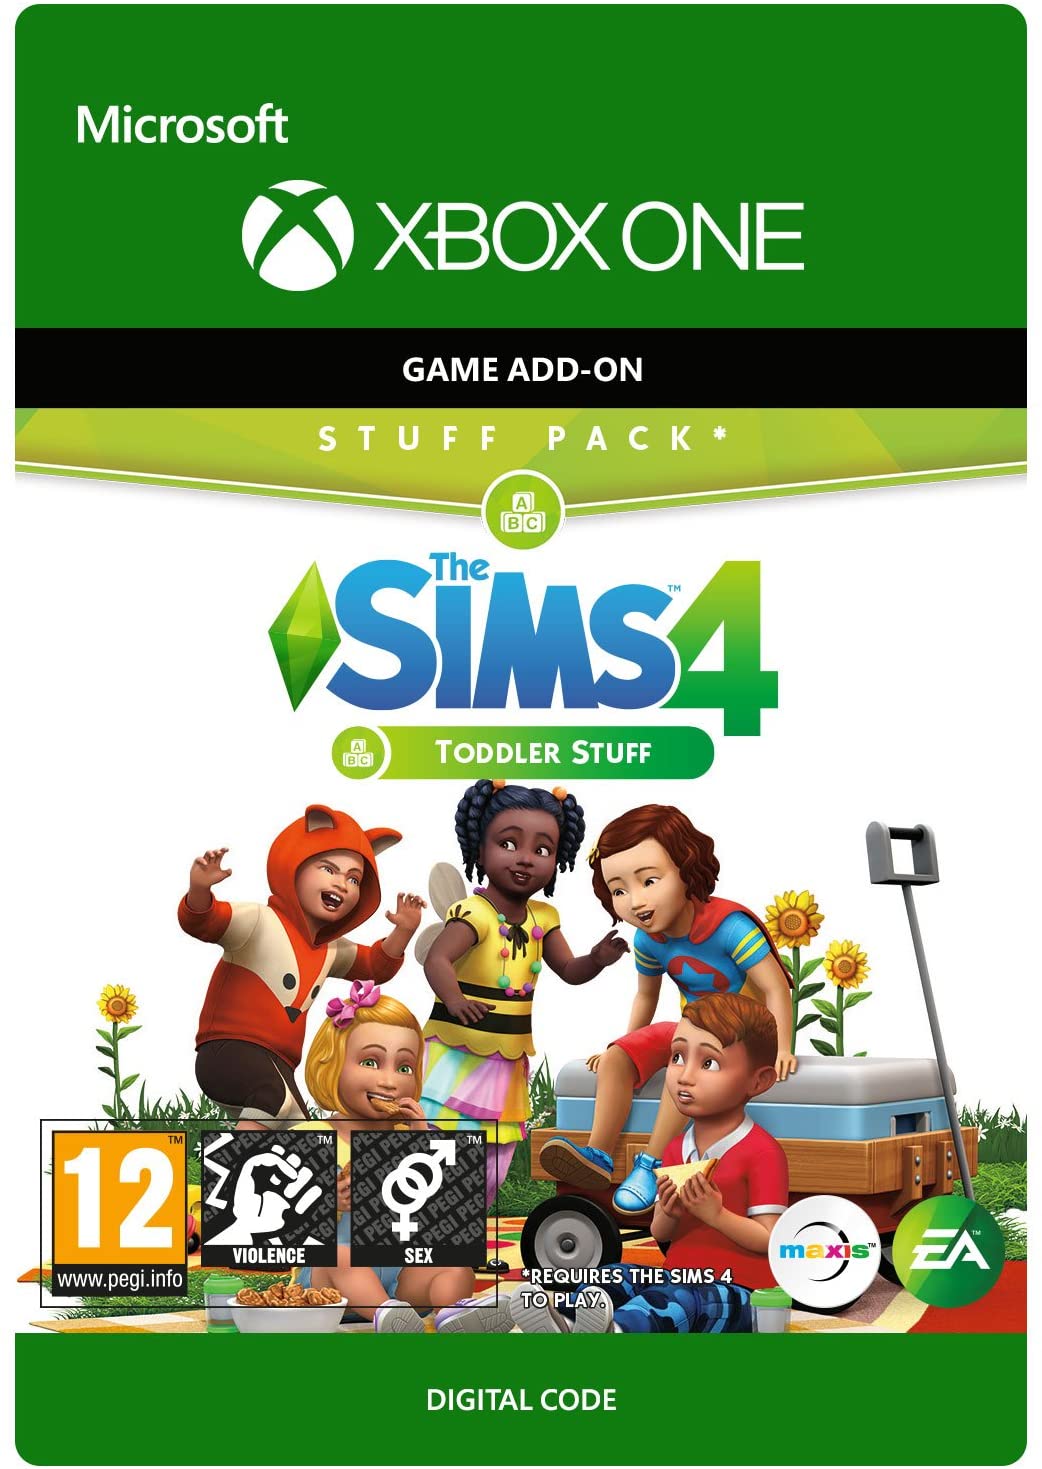 The Sims 4: Toddler Stuff Digital Download Key (Xbox One): USA